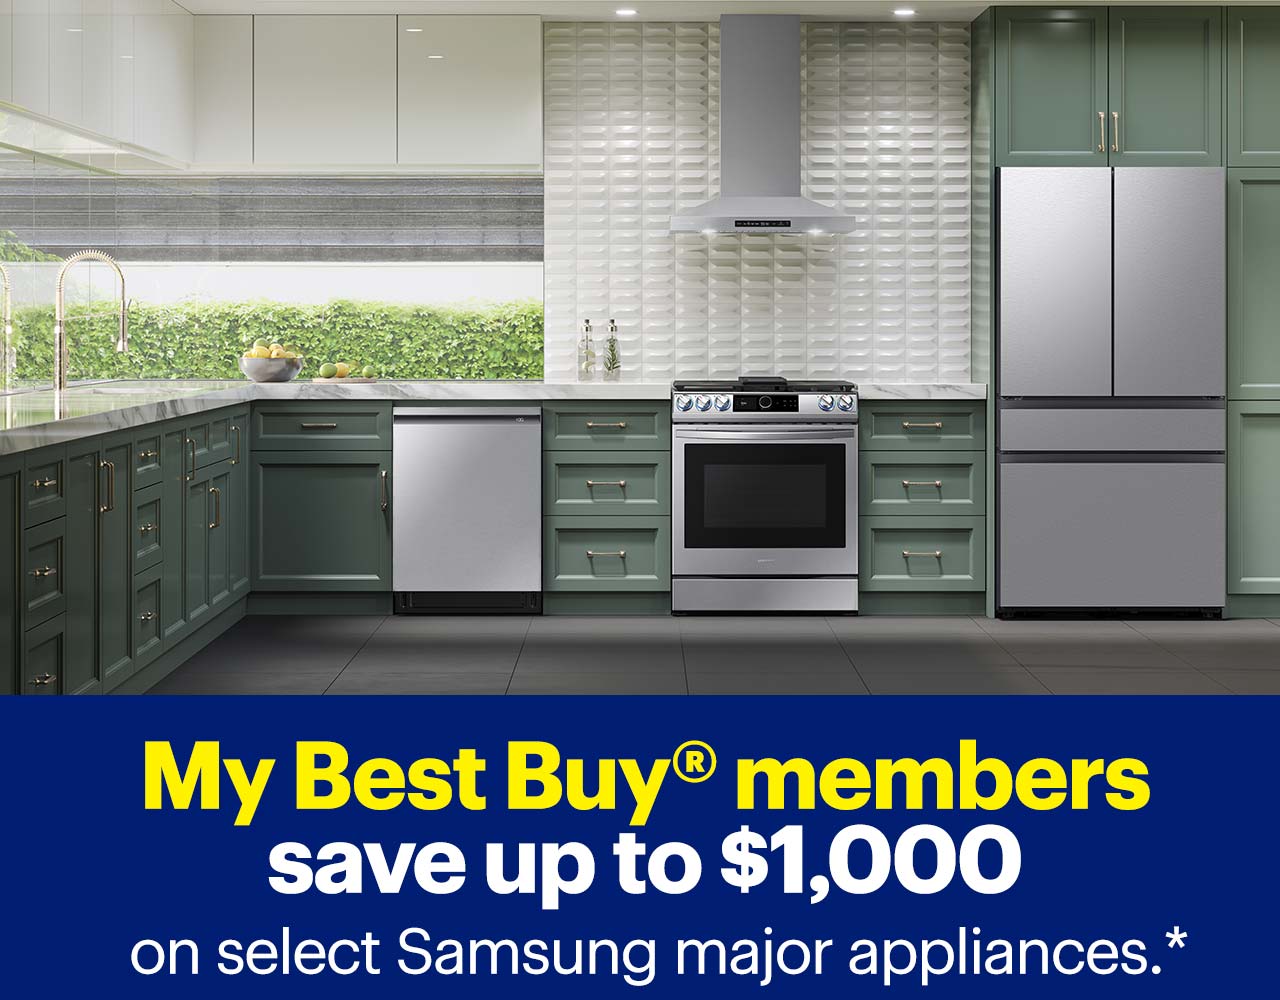 My Best Buy members save up to $1,000 on select Samsung major appliances. Reference disclaimer.